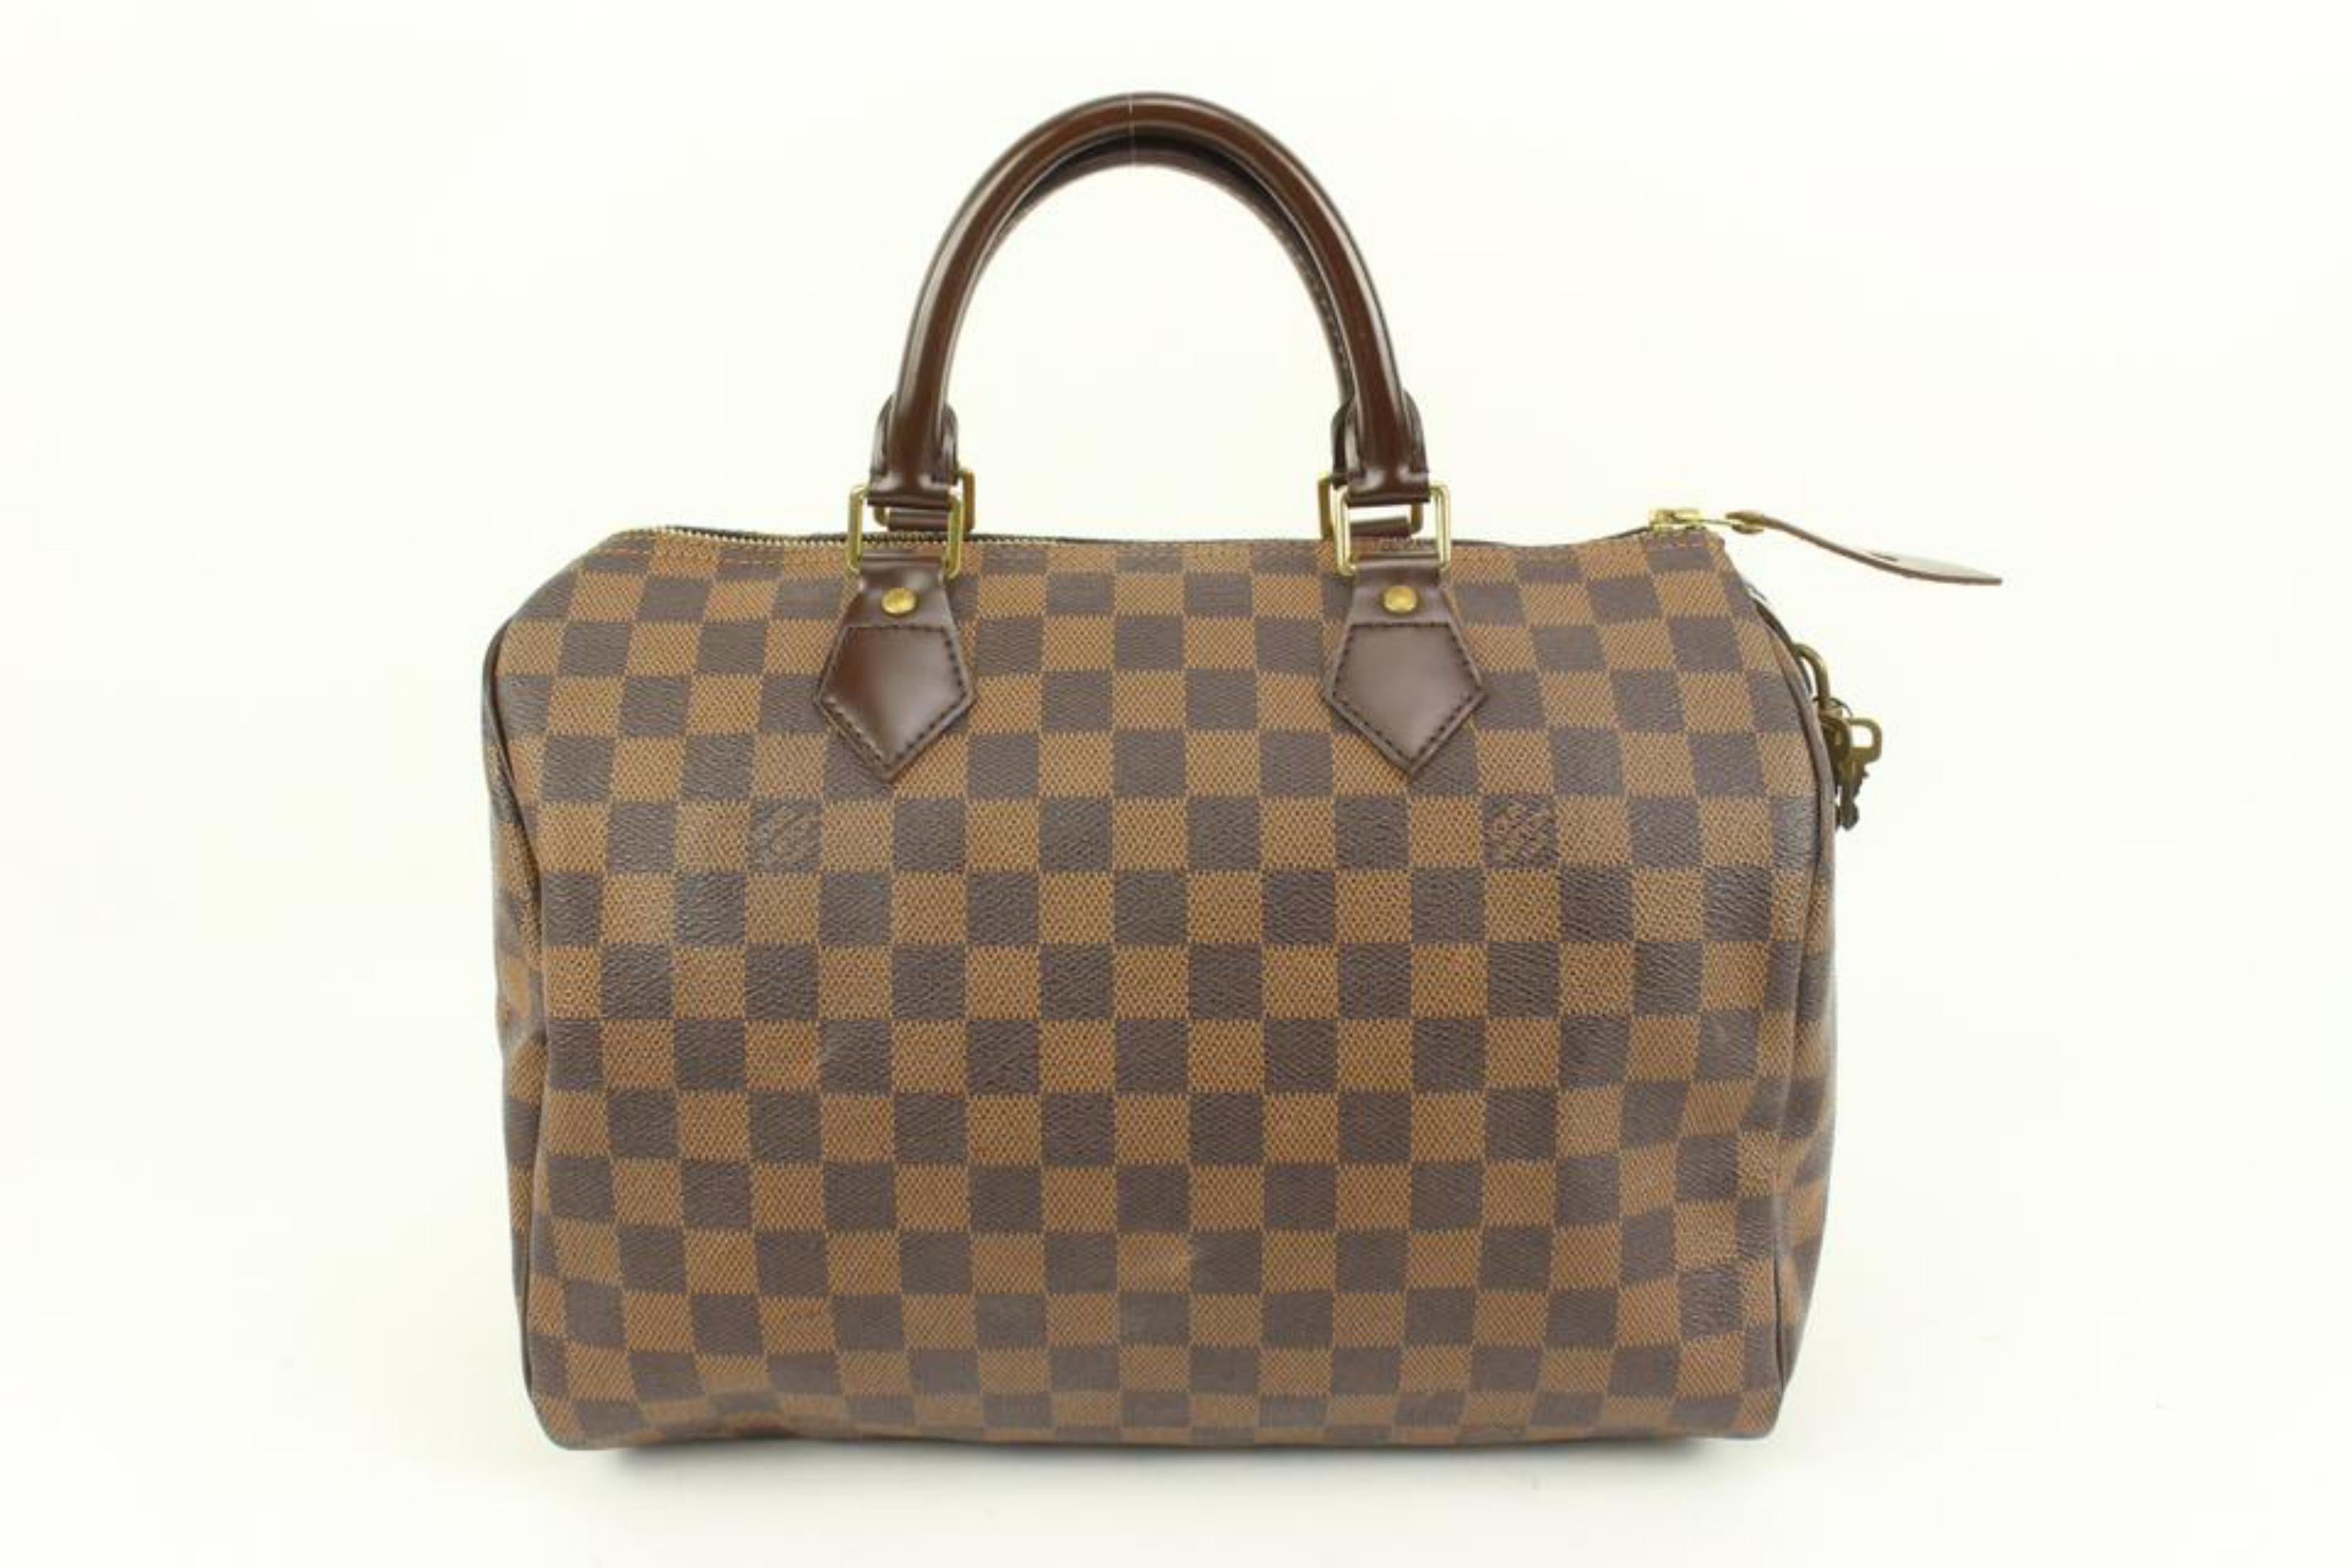 Louis Vuitton Damier Ebene Speedy 30 Boston Bag 41lk69 In Good Condition For Sale In Dix hills, NY